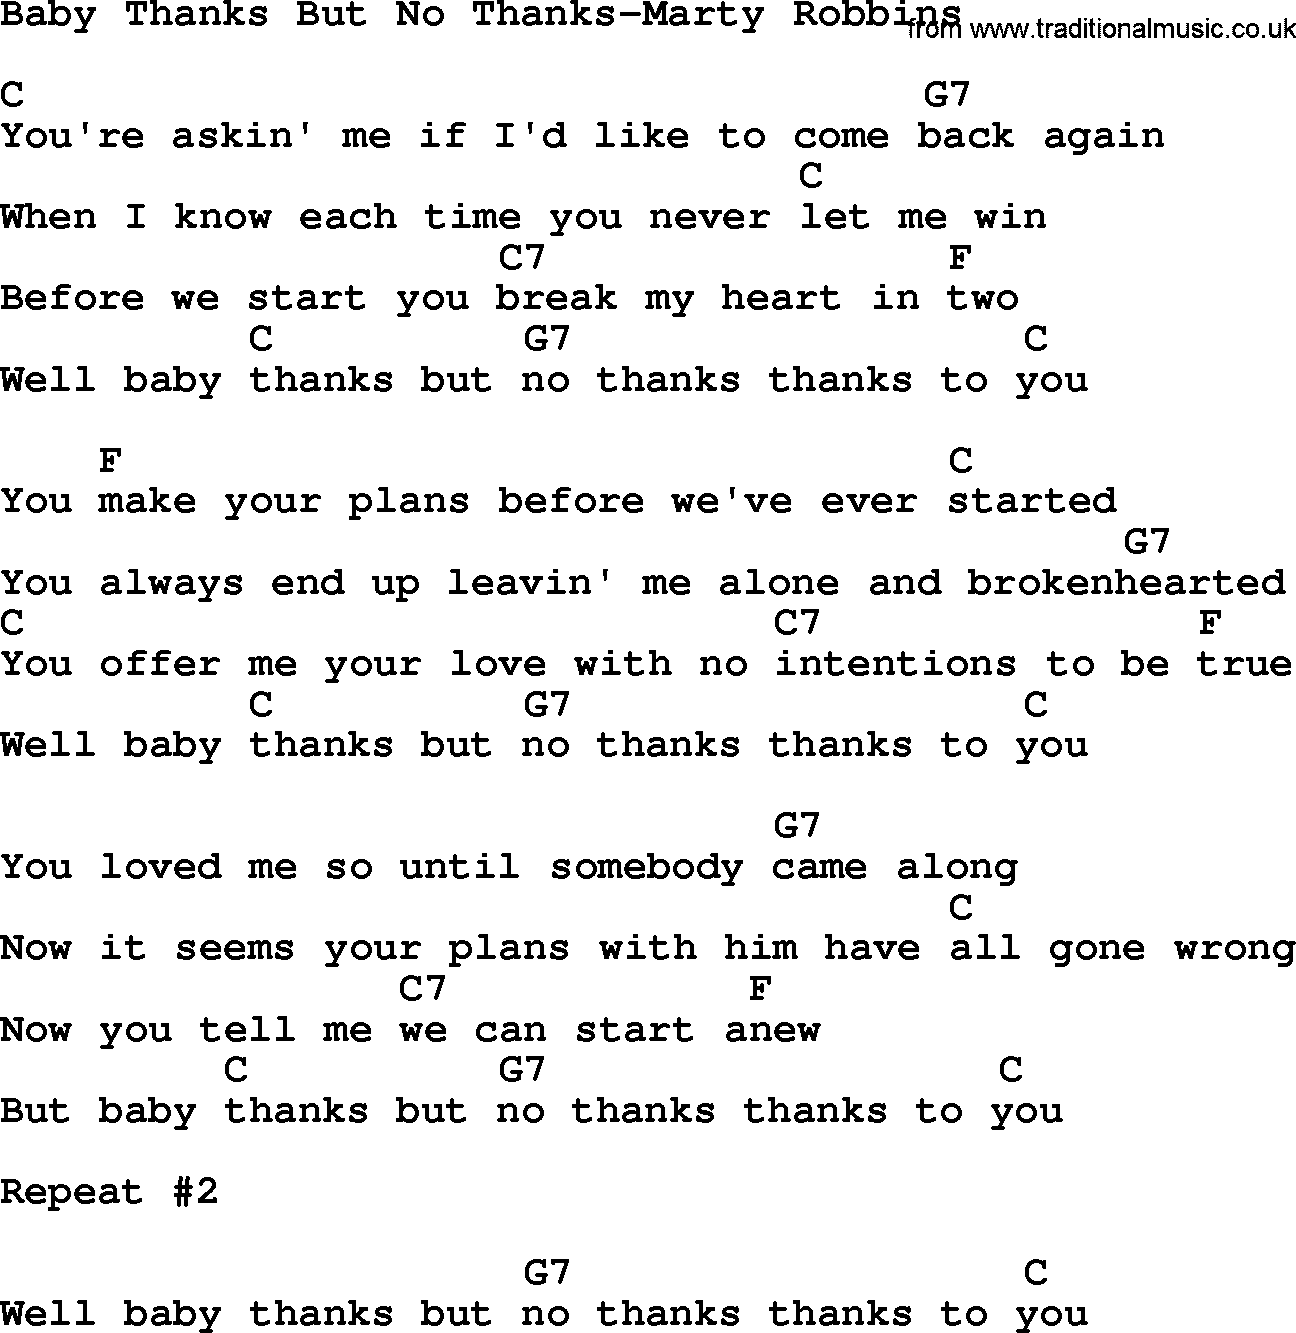 Country music song: Baby Thanks But No Thanks-Marty Robbins lyrics and chords